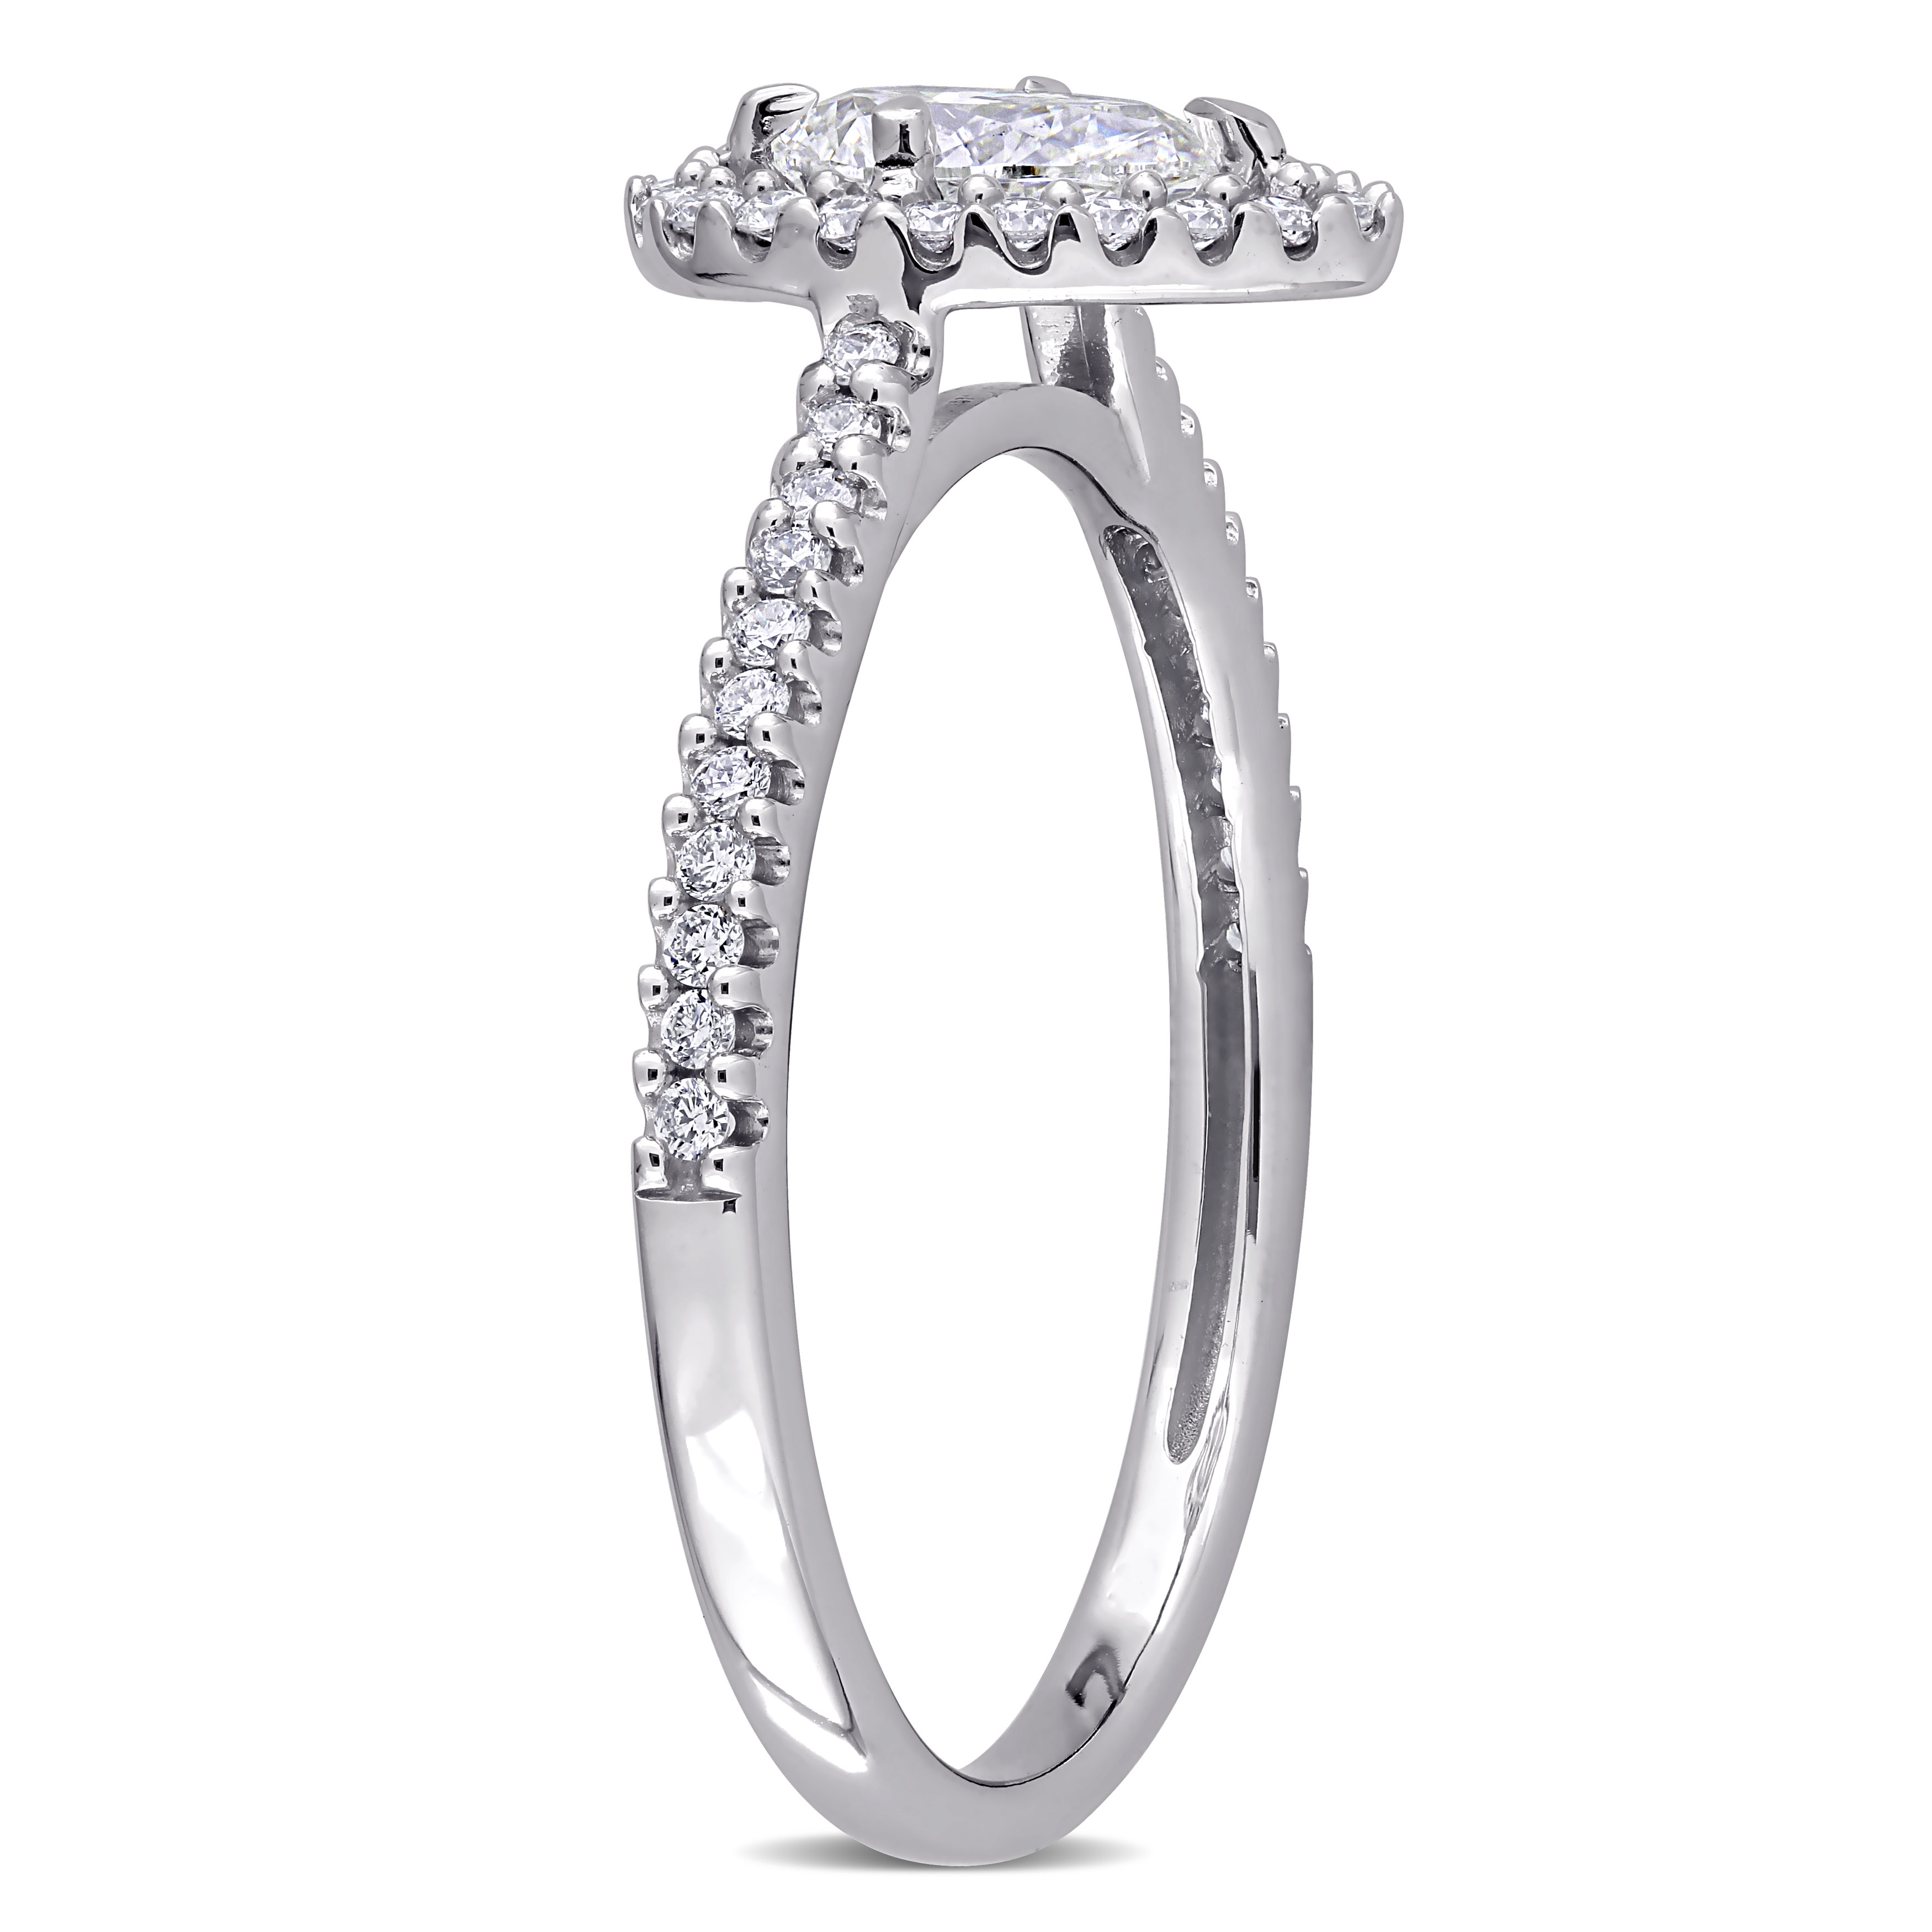 3/4 CT TW Pear-Cut Diamond Floating Halo Engagement Ring in 14k White Gold